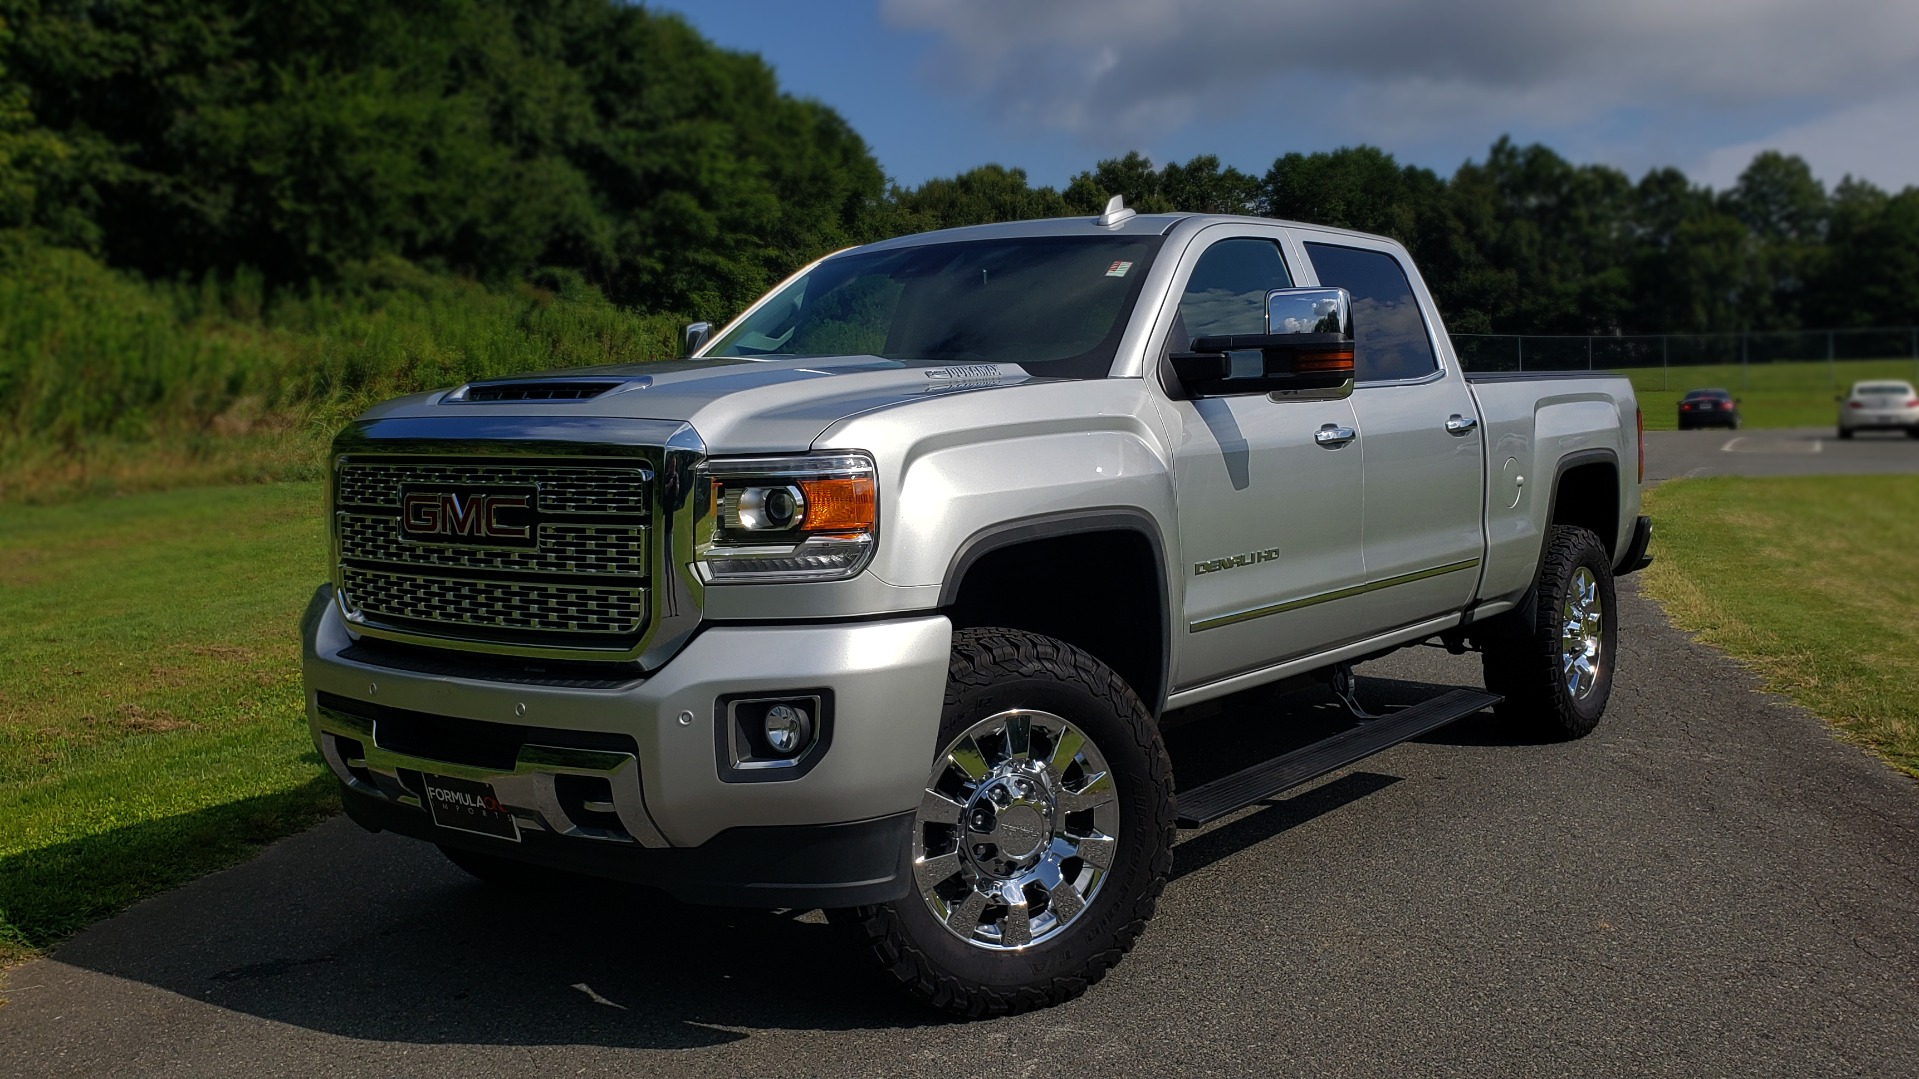 Used 2018 GMC SIERRA 2500HD DENALI 4WD / 6.6L DURAMAX / NAV / SUNROOF / BOSE / REARVIEW for sale Sold at Formula Imports in Charlotte NC 28227 1